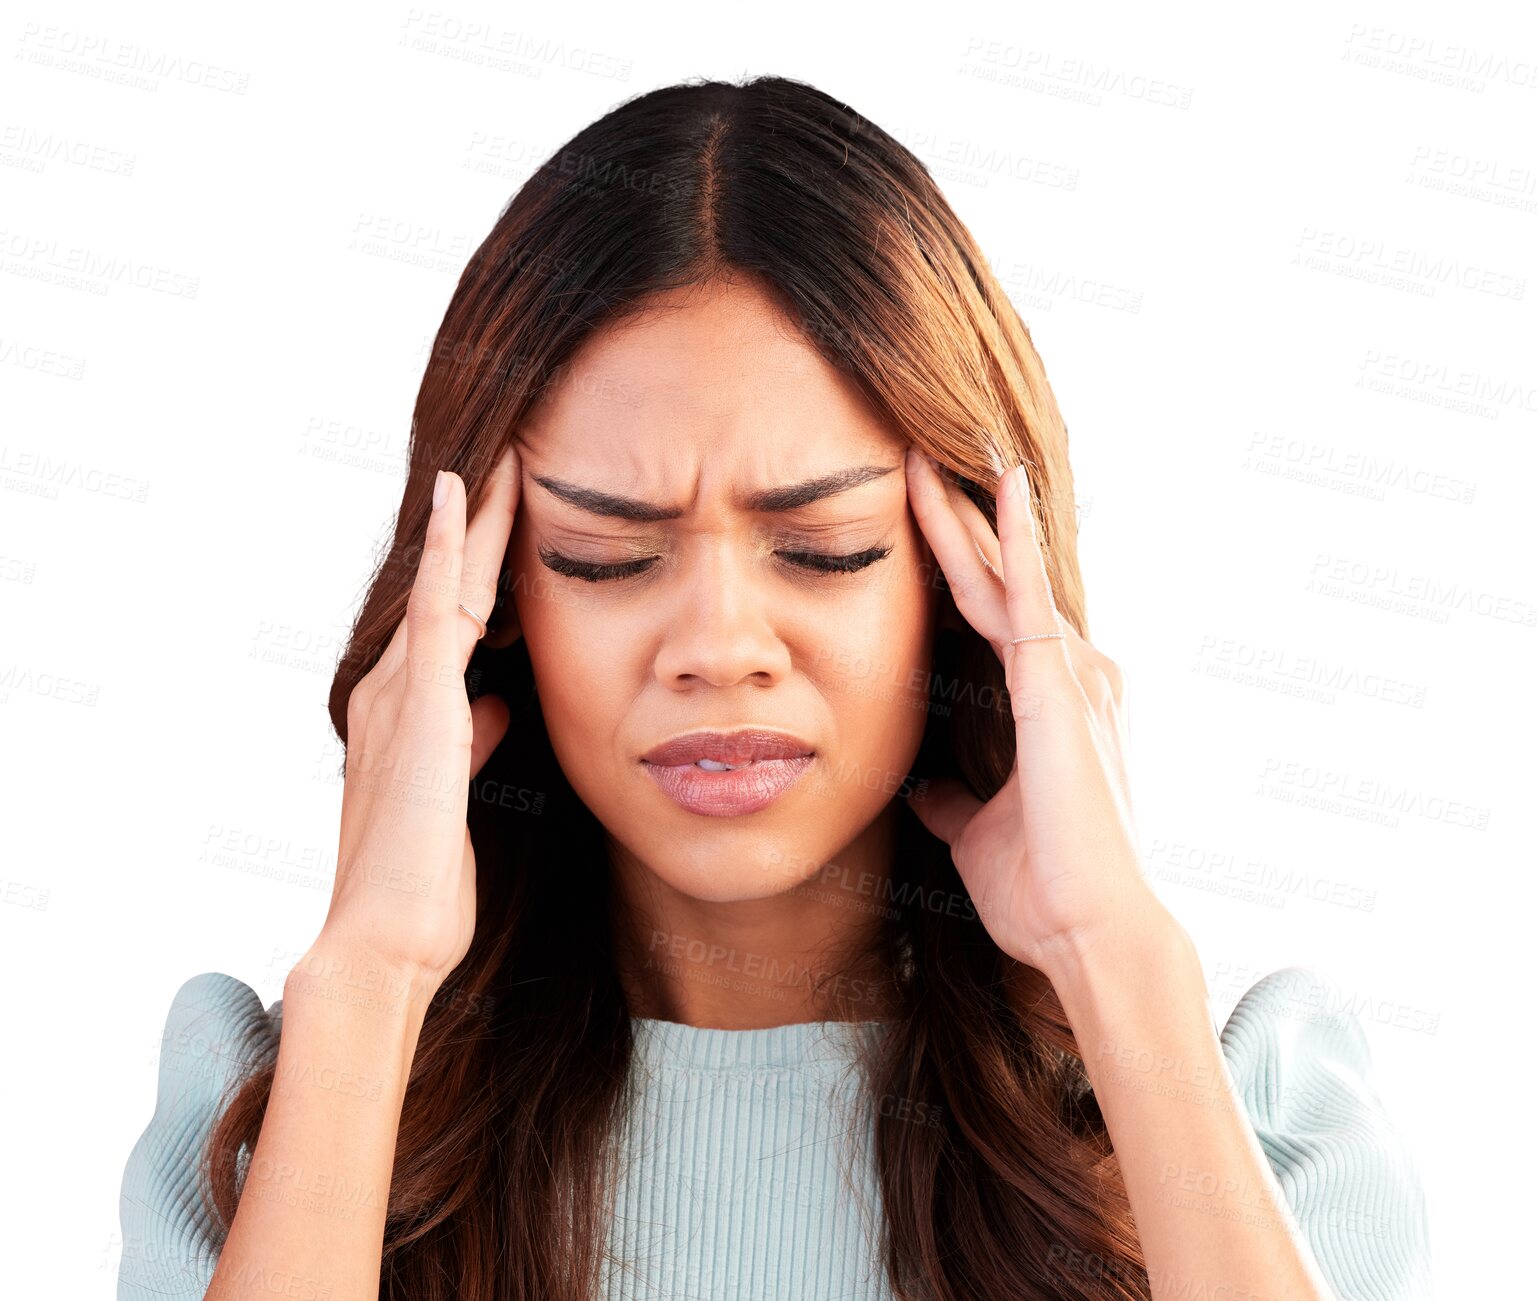 Buy stock photo Pain, stress or woman with headache, anxiety or burnout isolated on transparent png background. Exhausted, temple massage or face of sick female person frustrated with depression or migraine crisis 